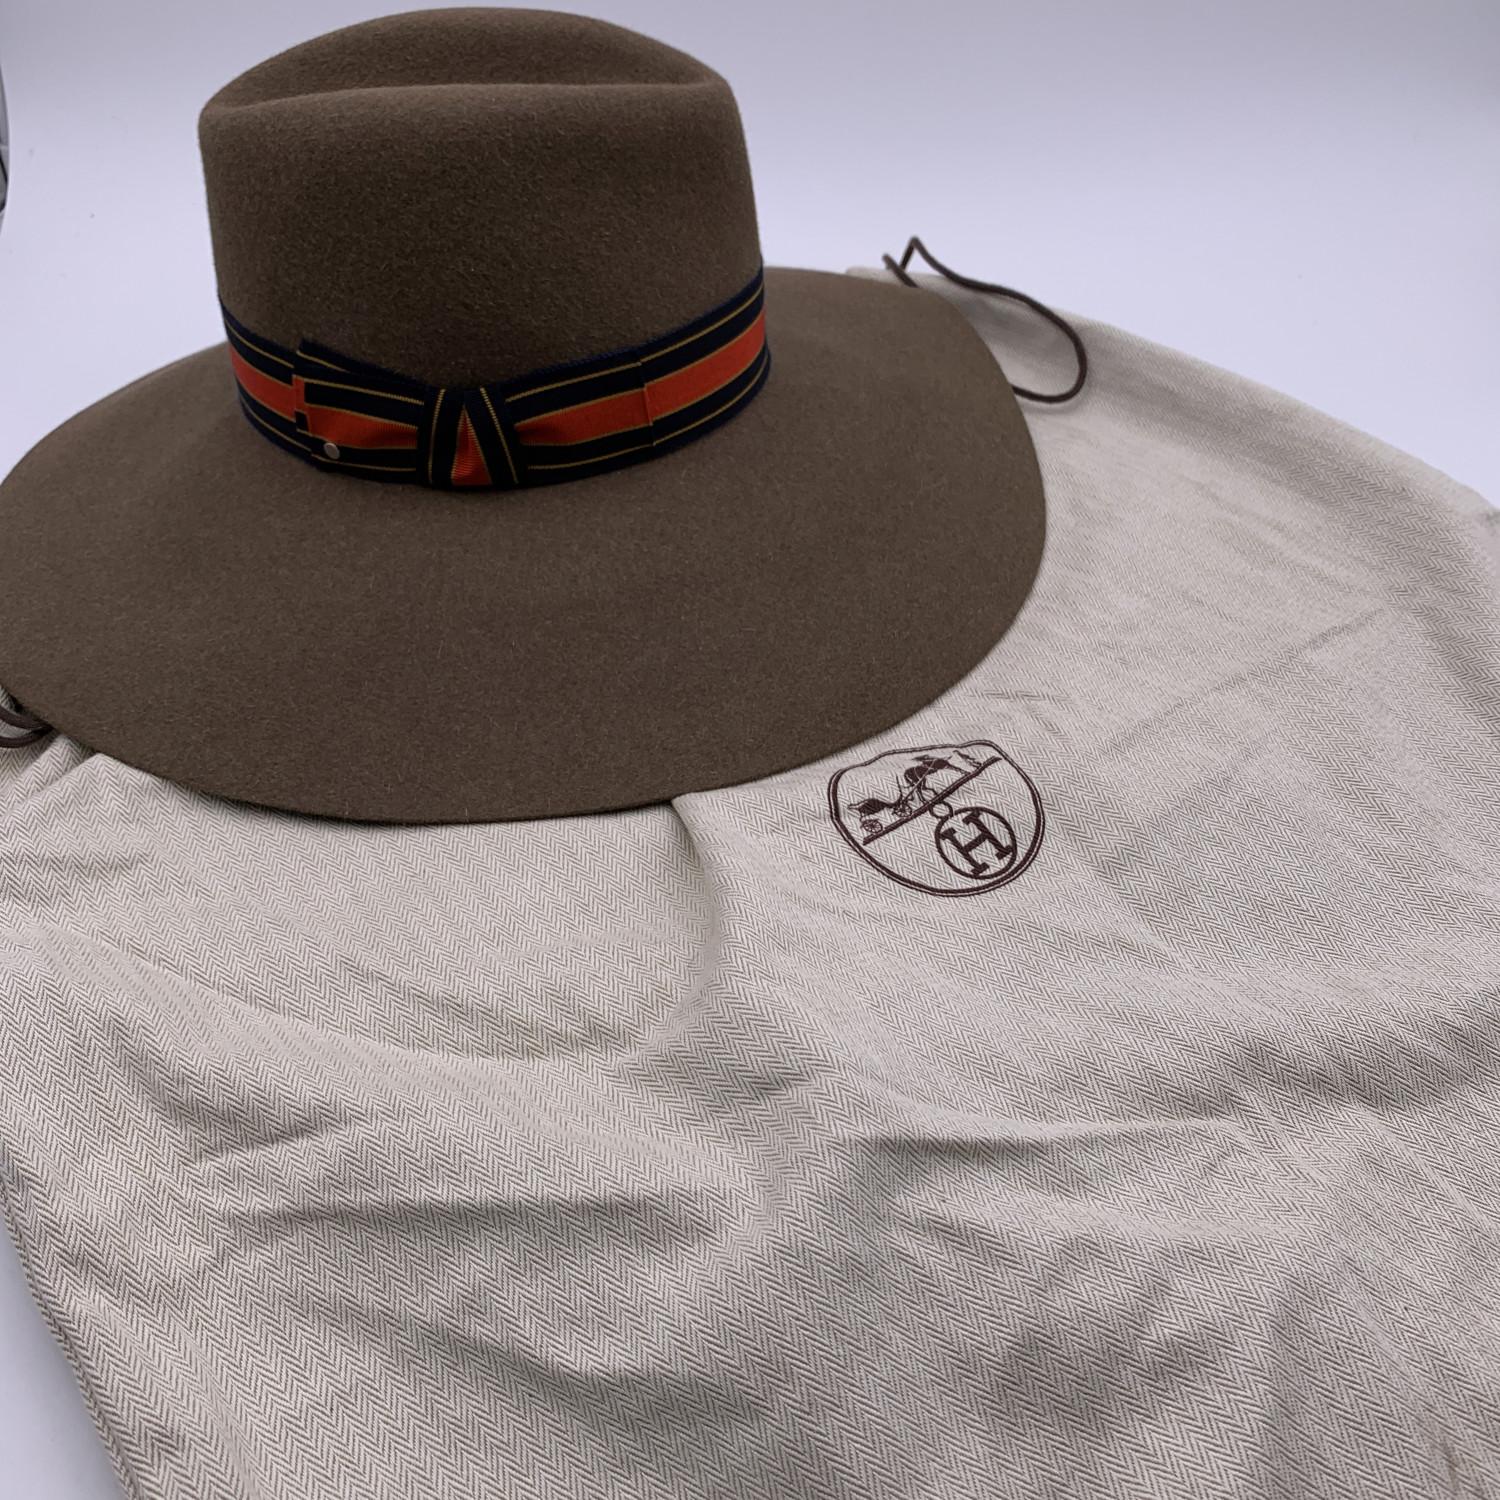 Brown unisex hat from Hermes. Made of felt. Composition: 100% Rabbit felt. Striped ribbon around the crown. Cotton and viscose trim inside. Size: 57 mm. Brim width: 4.5 inches - 11.5 cm. Hermes tag inside

Details

MATERIAL: Fur

COLOR: